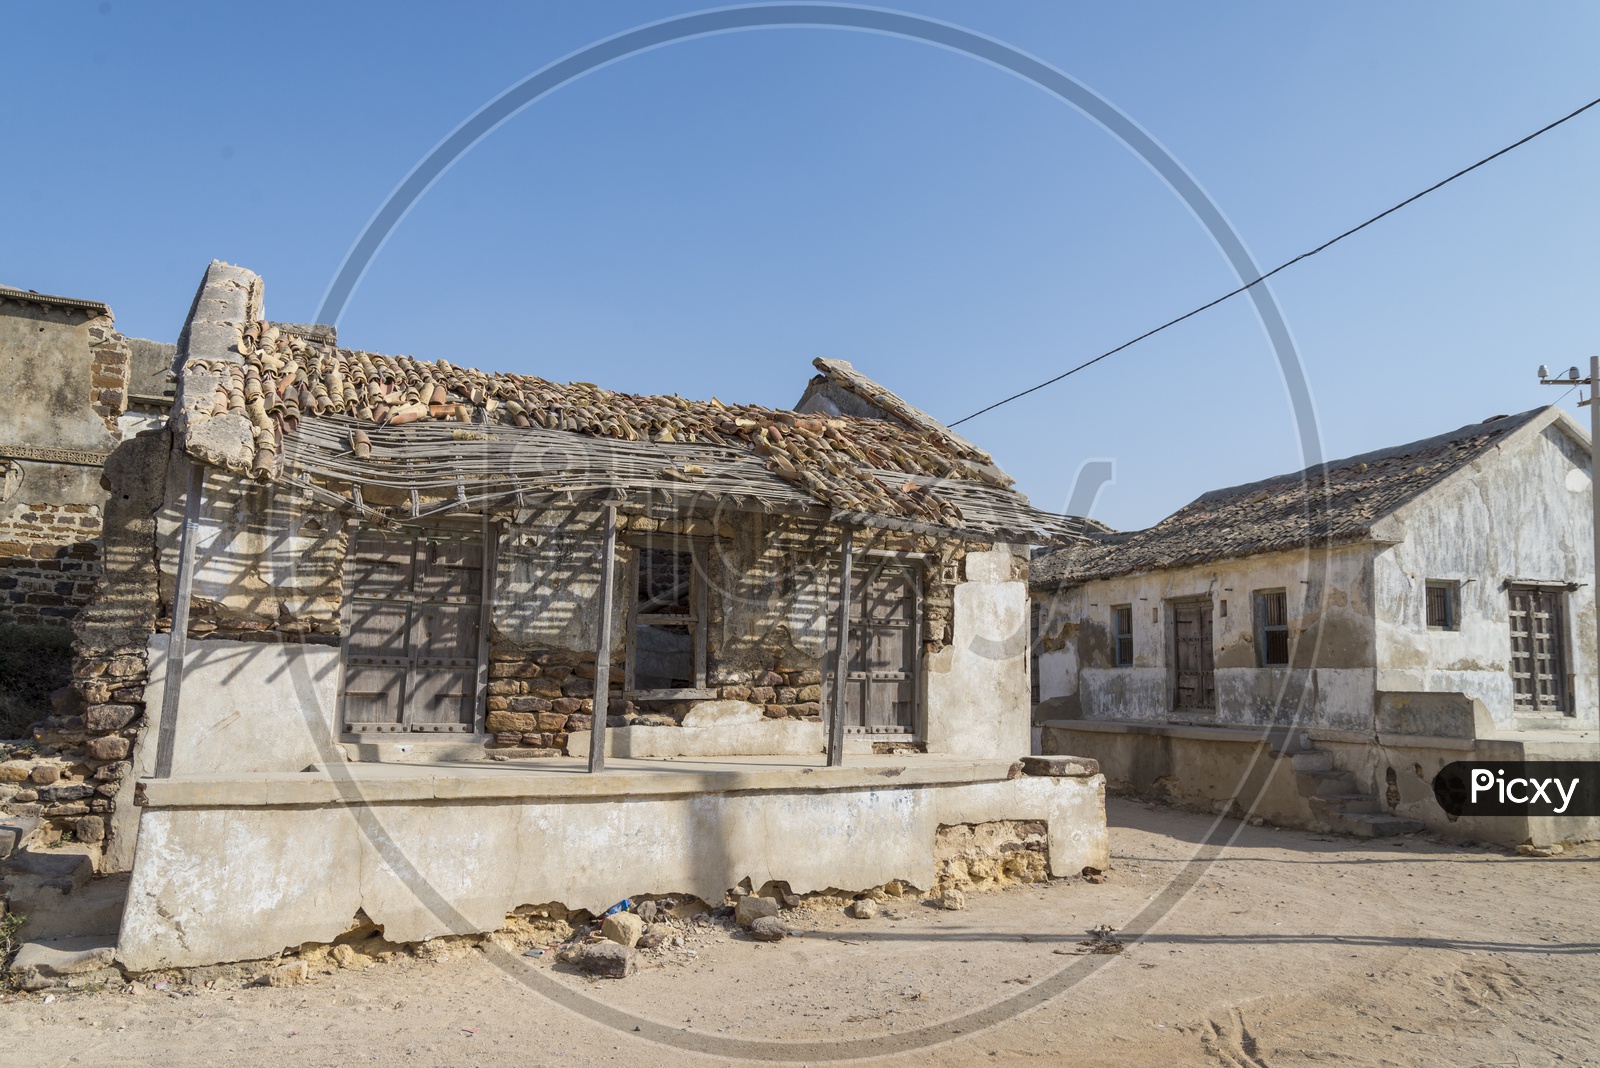 Lakhpat Old Houses